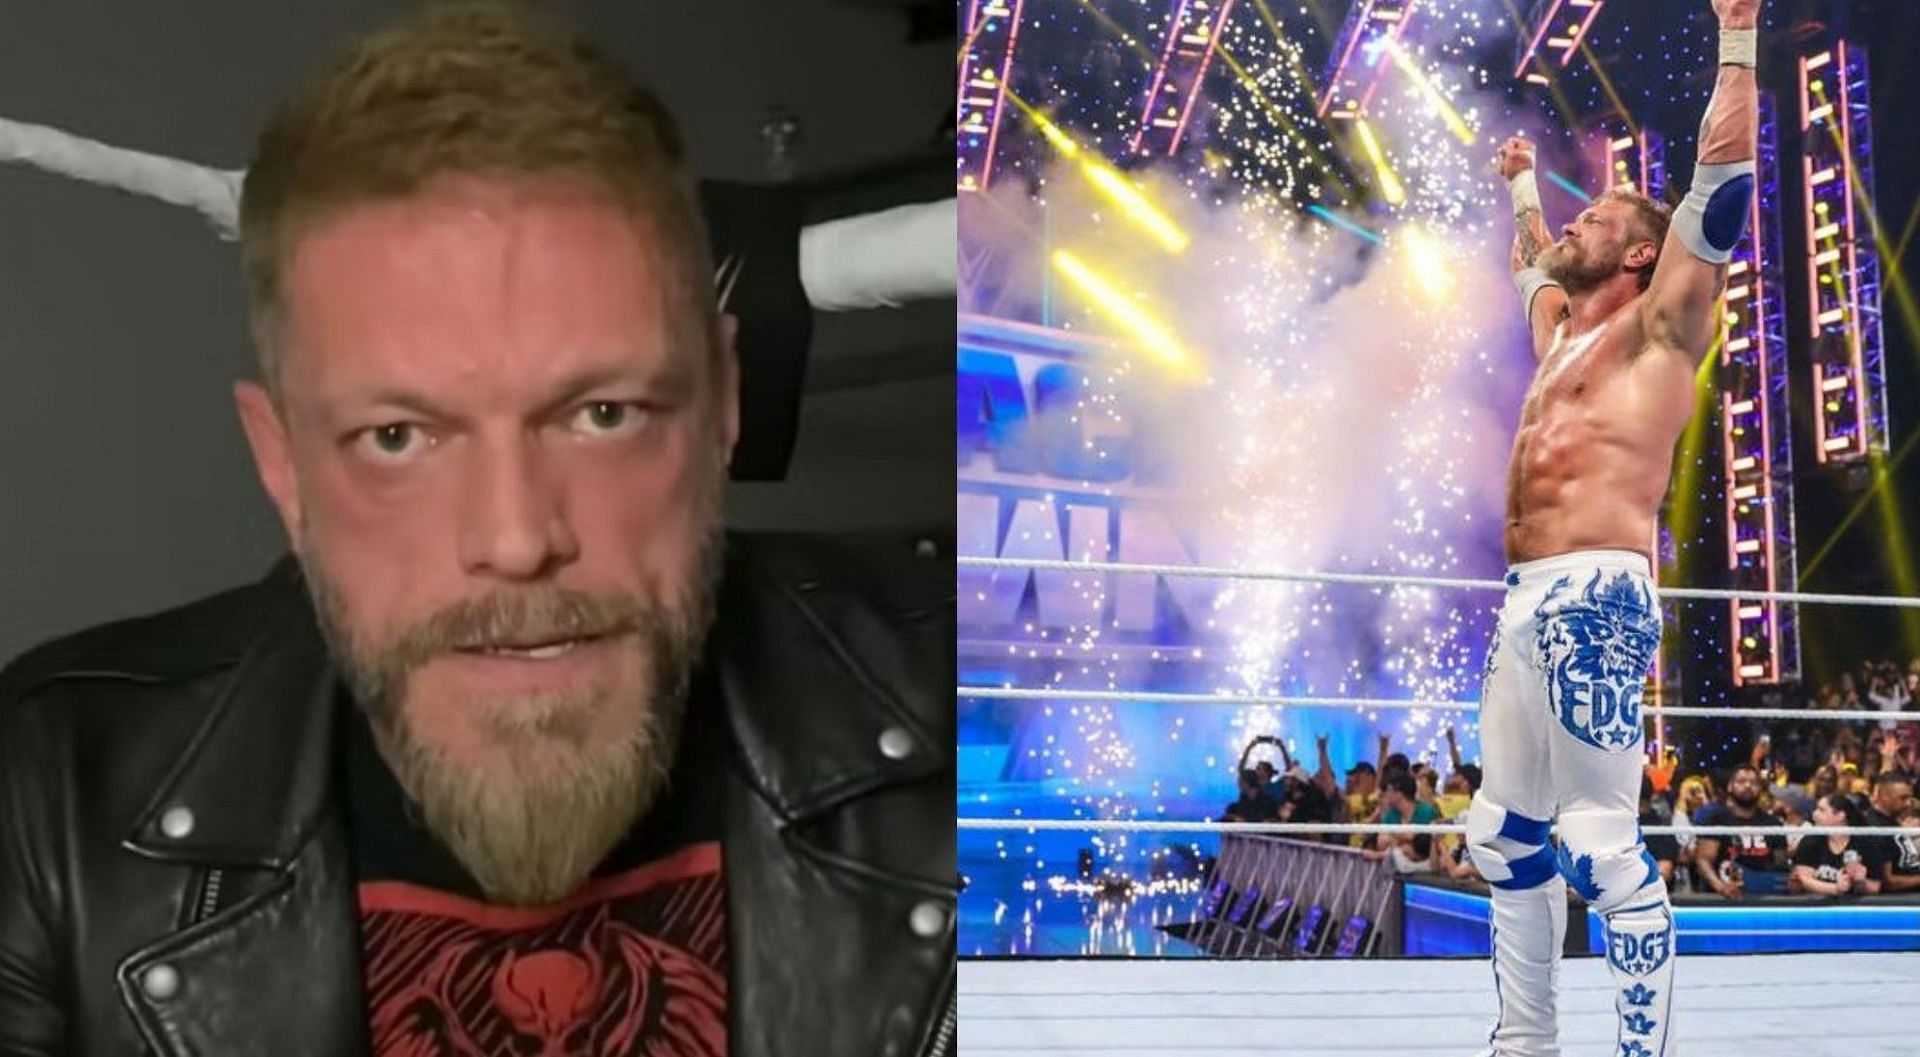 Edge received an emotional sendoff from the fans